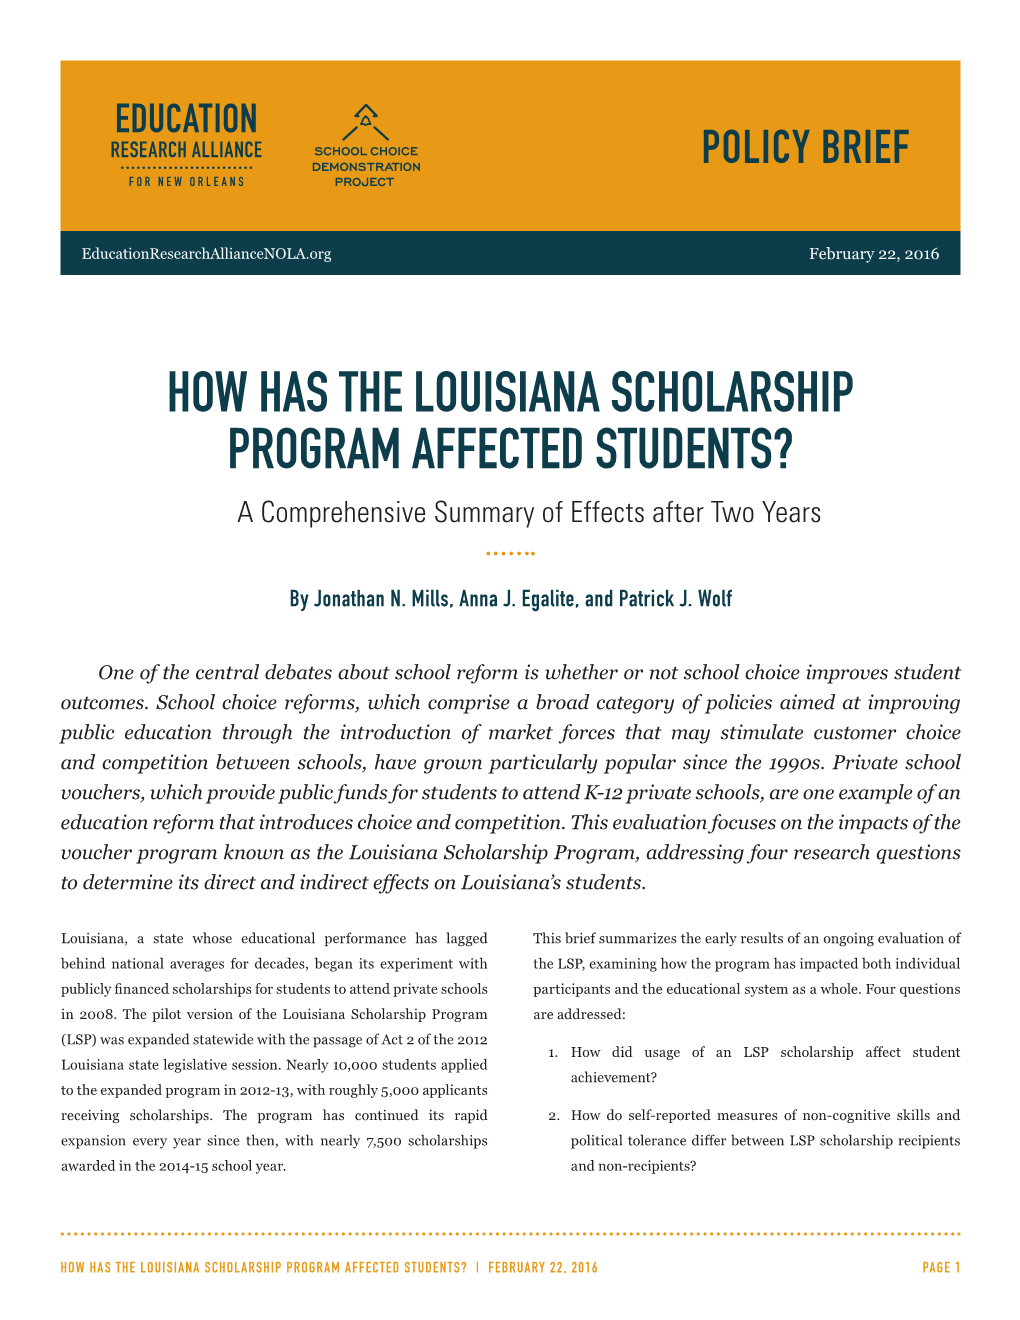 HOW HAS the LOUISIANA SCHOLARSHIP PROGRAM AFFECTED STUDENTS? a Comprehensive Summary of Effects After Two Years